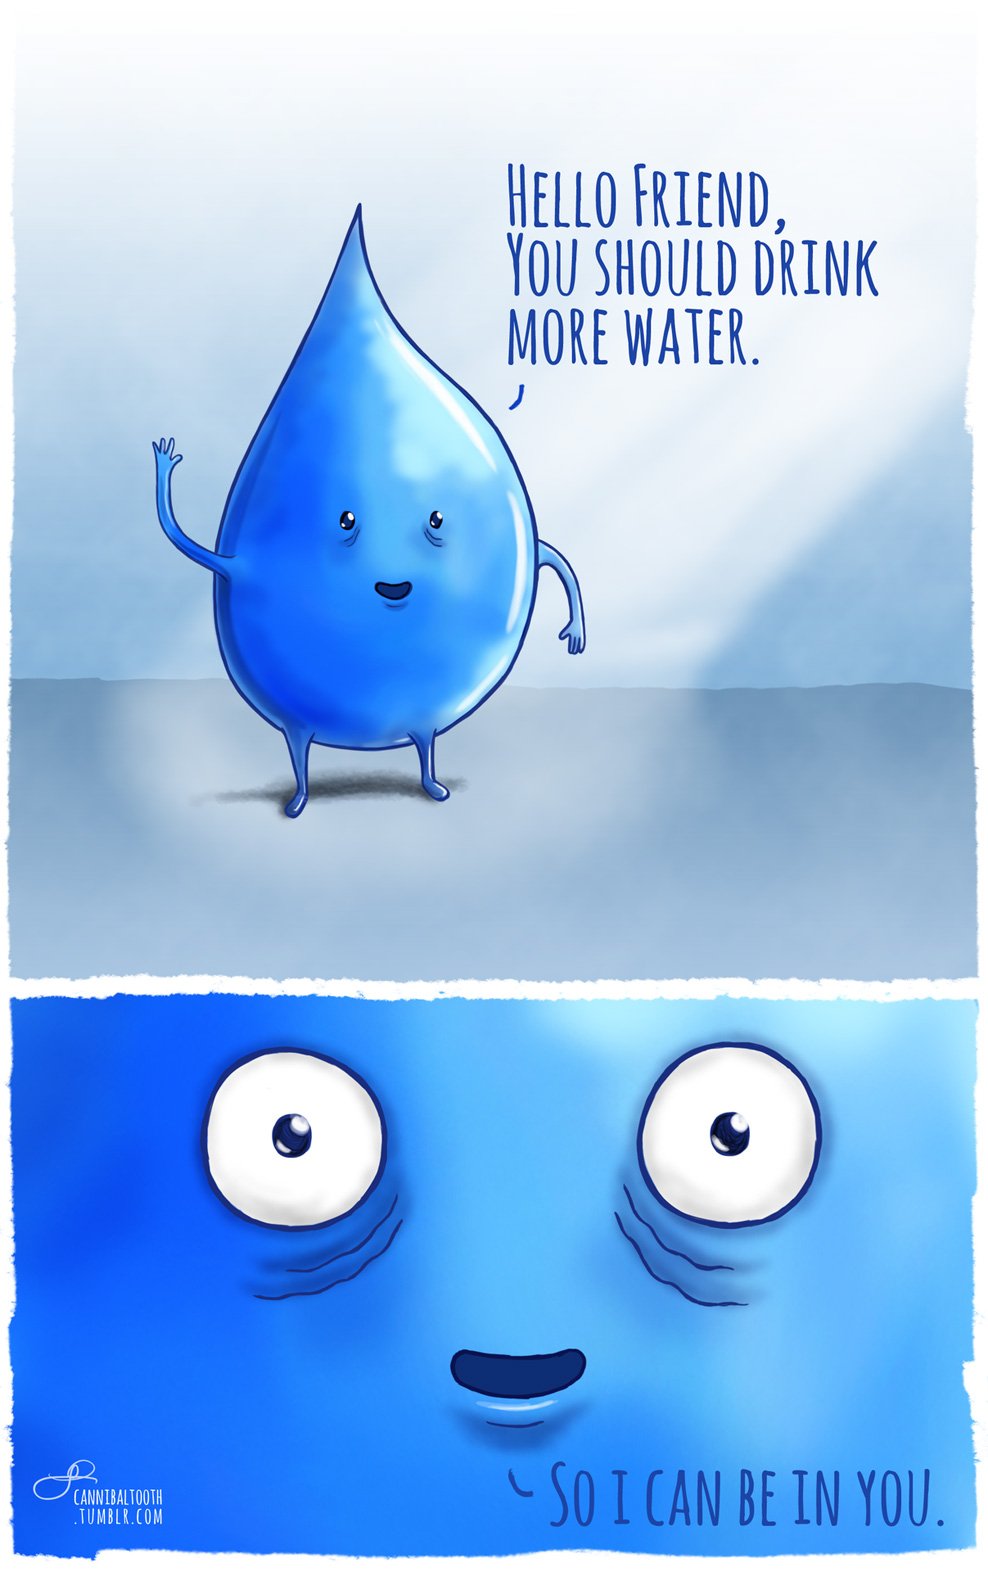 You should drink more water.